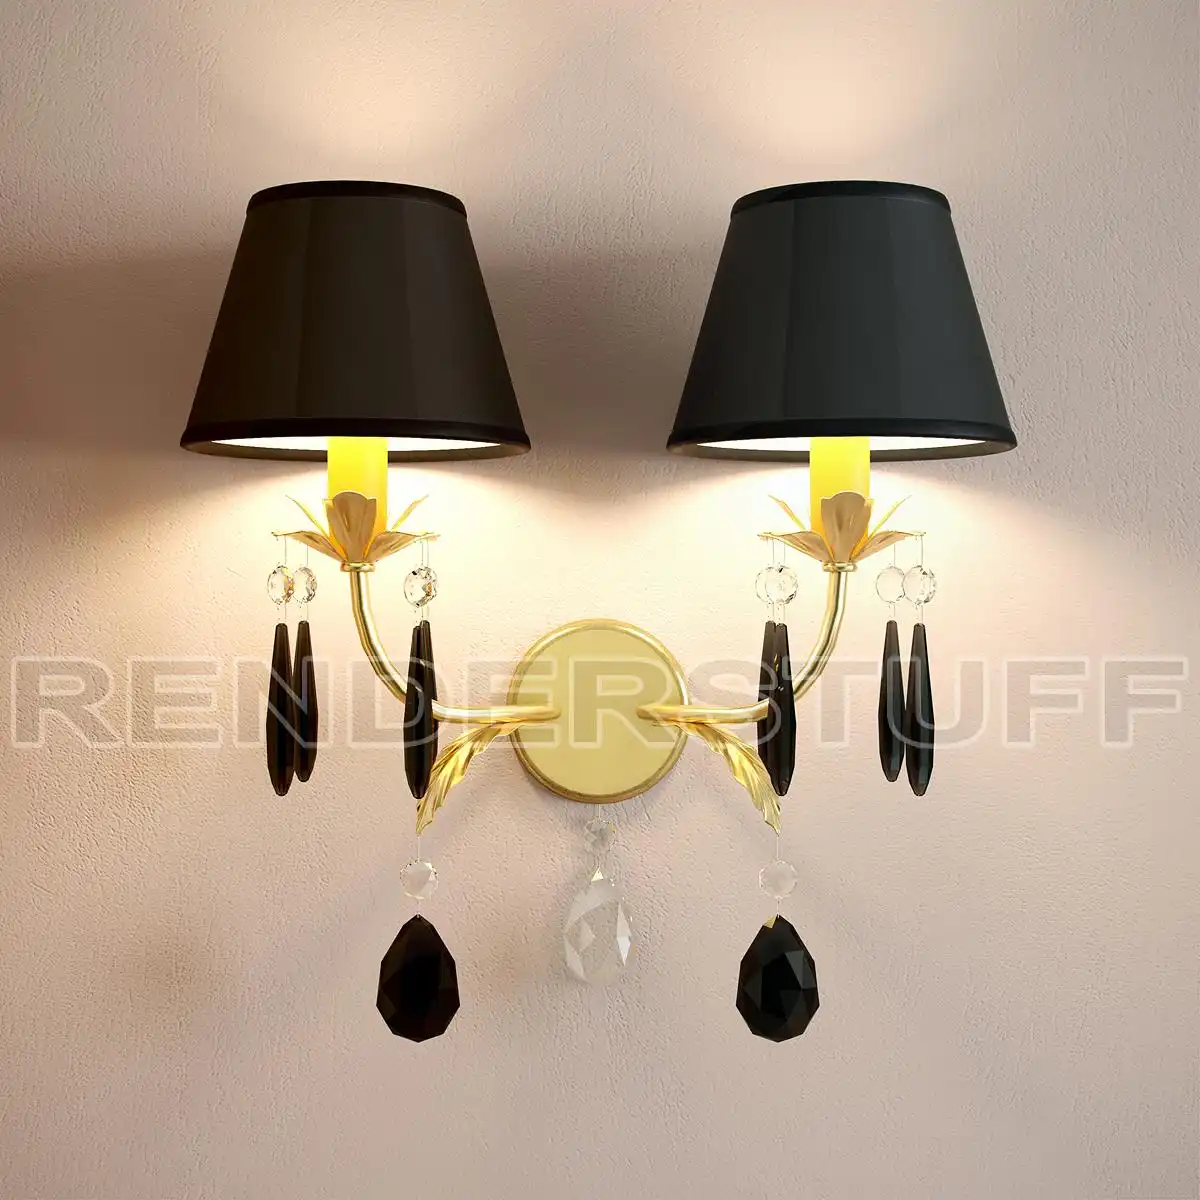 Golden Double Sconce w Black Shades Free 3D Model